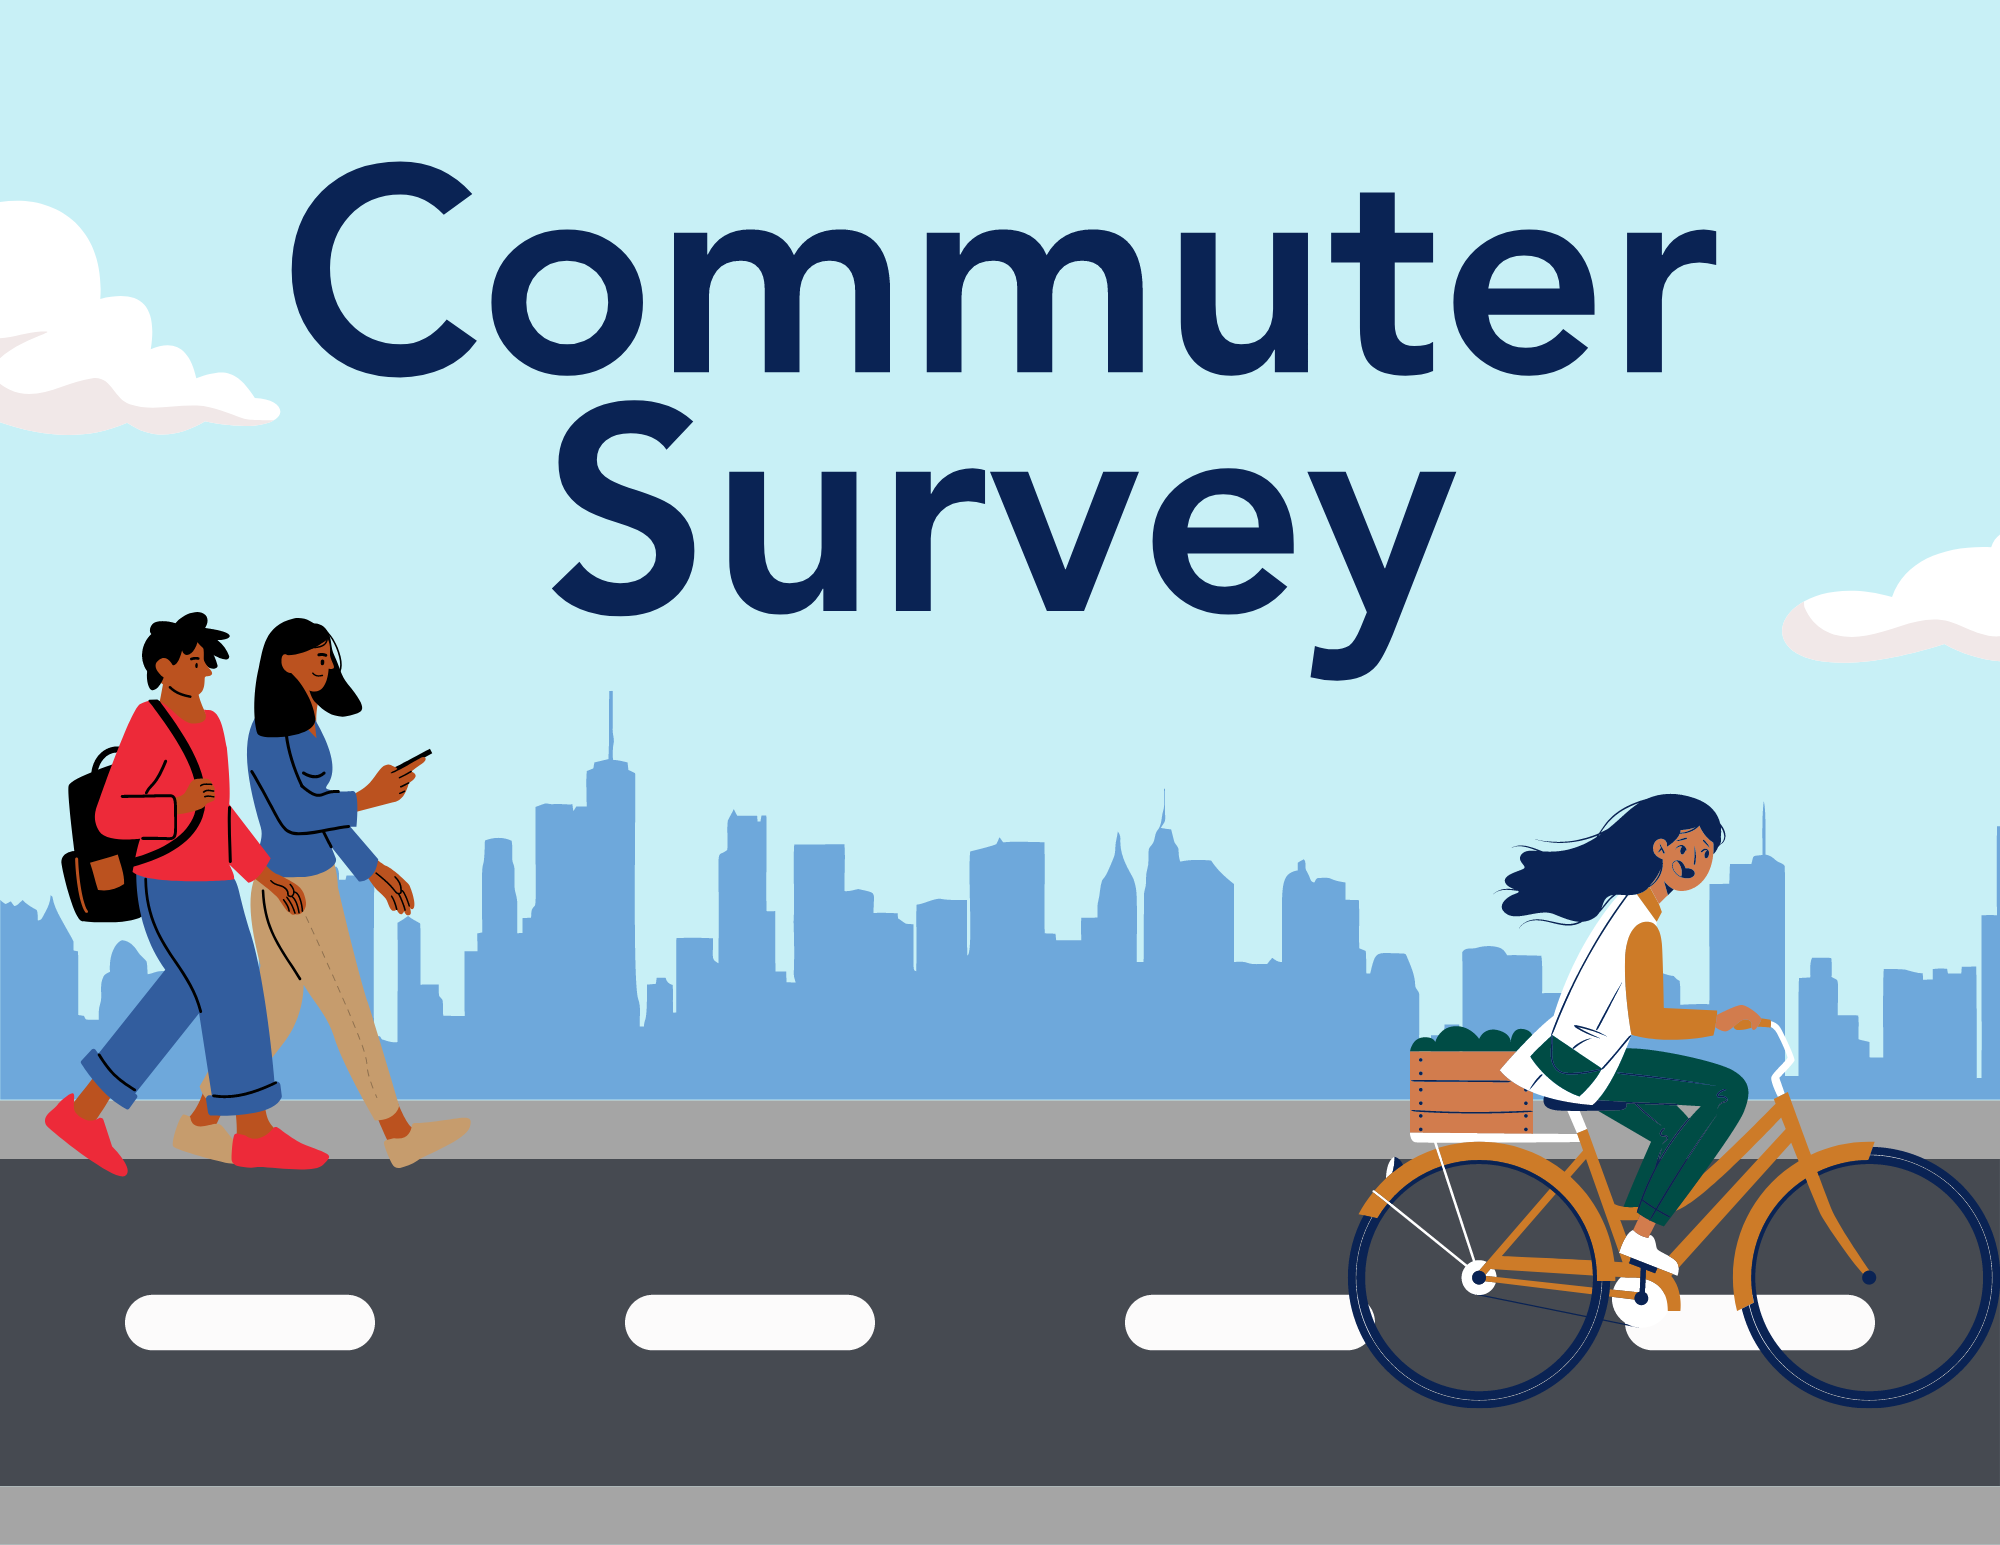 Link to commuter survey